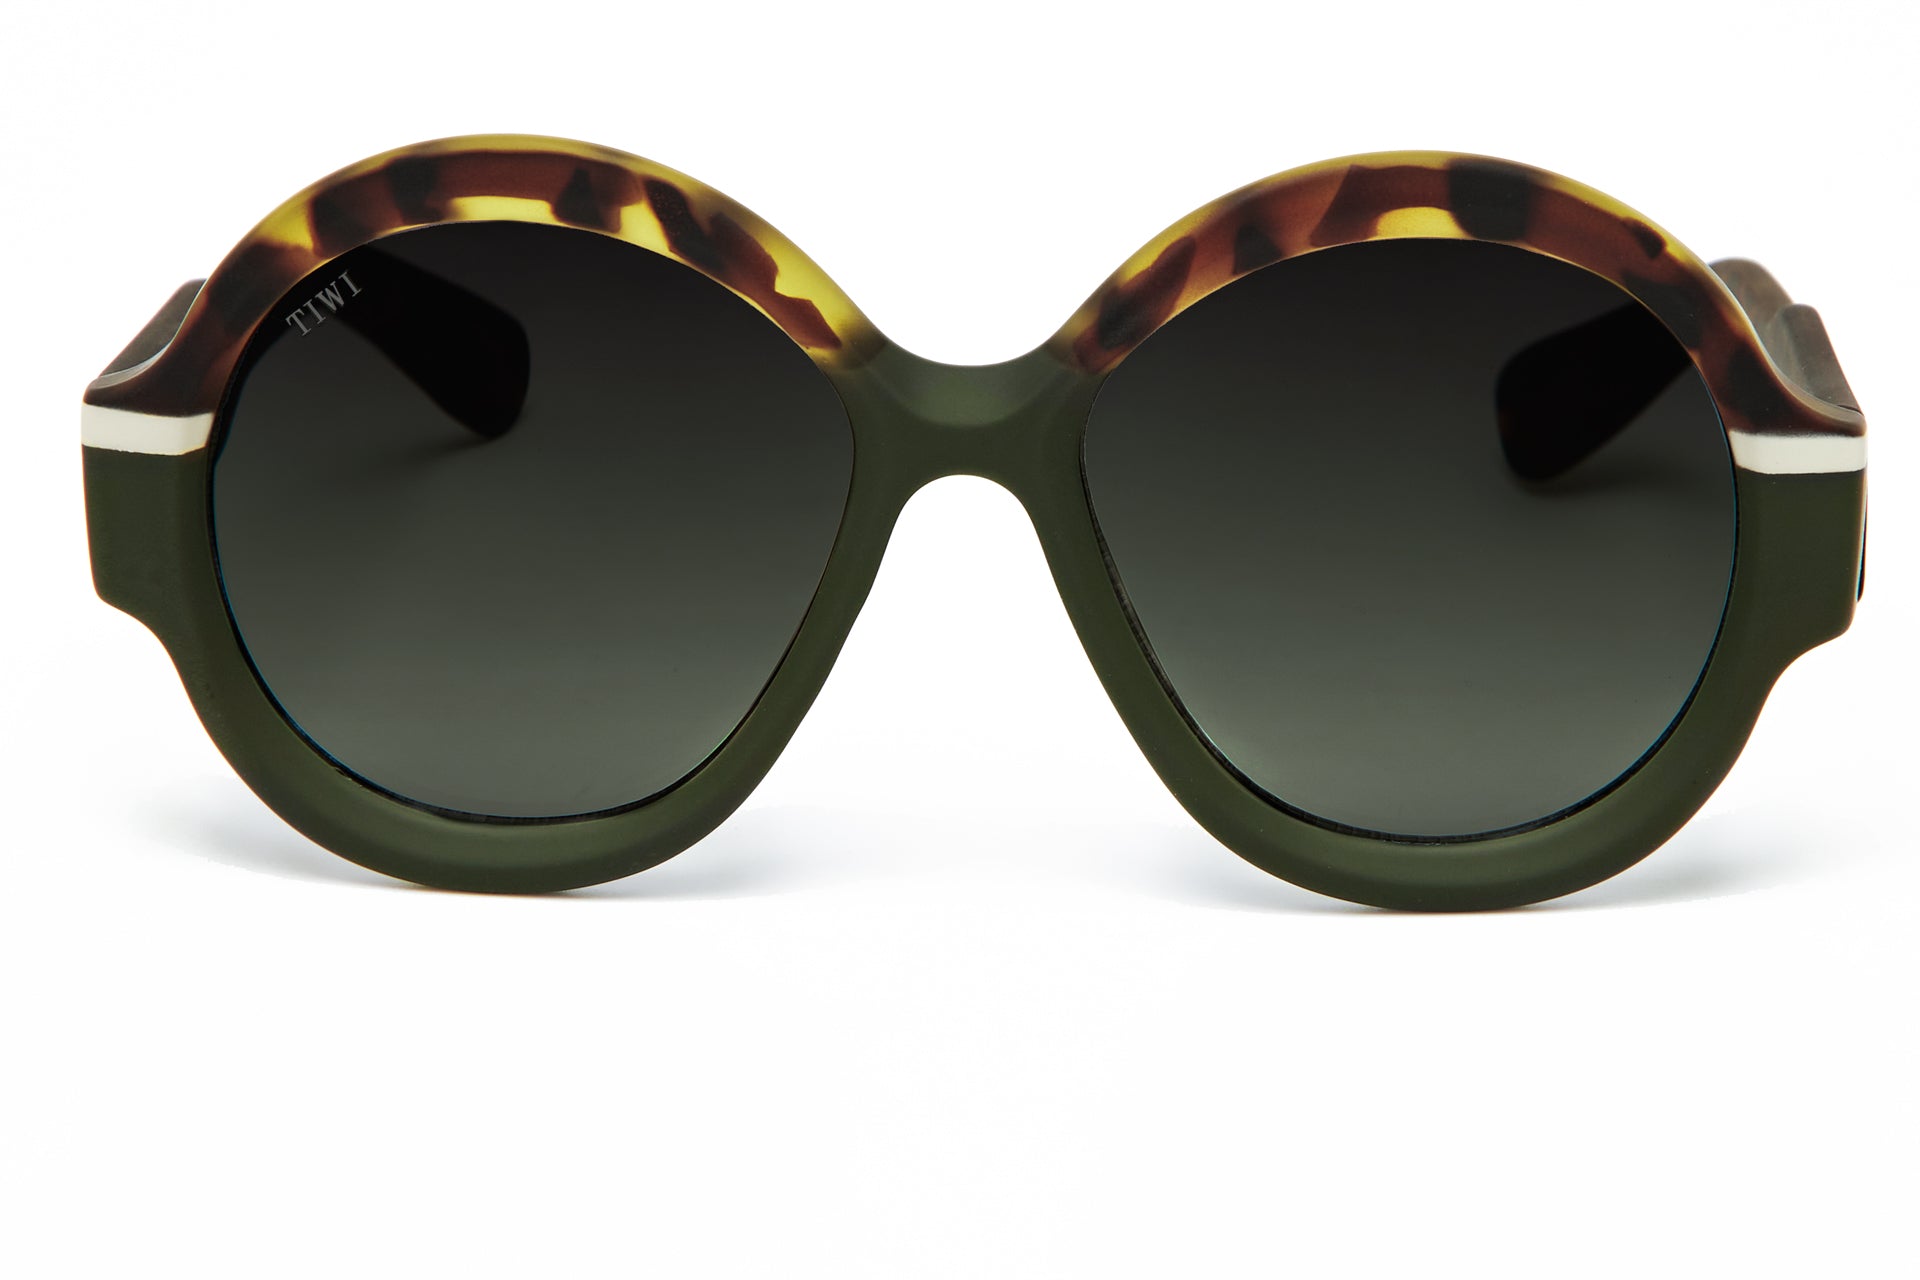 GAMBETTA Sunglasses Available in more colors Tricolour Green/Beige/H. Tortoise with Green Gradient Lenses  